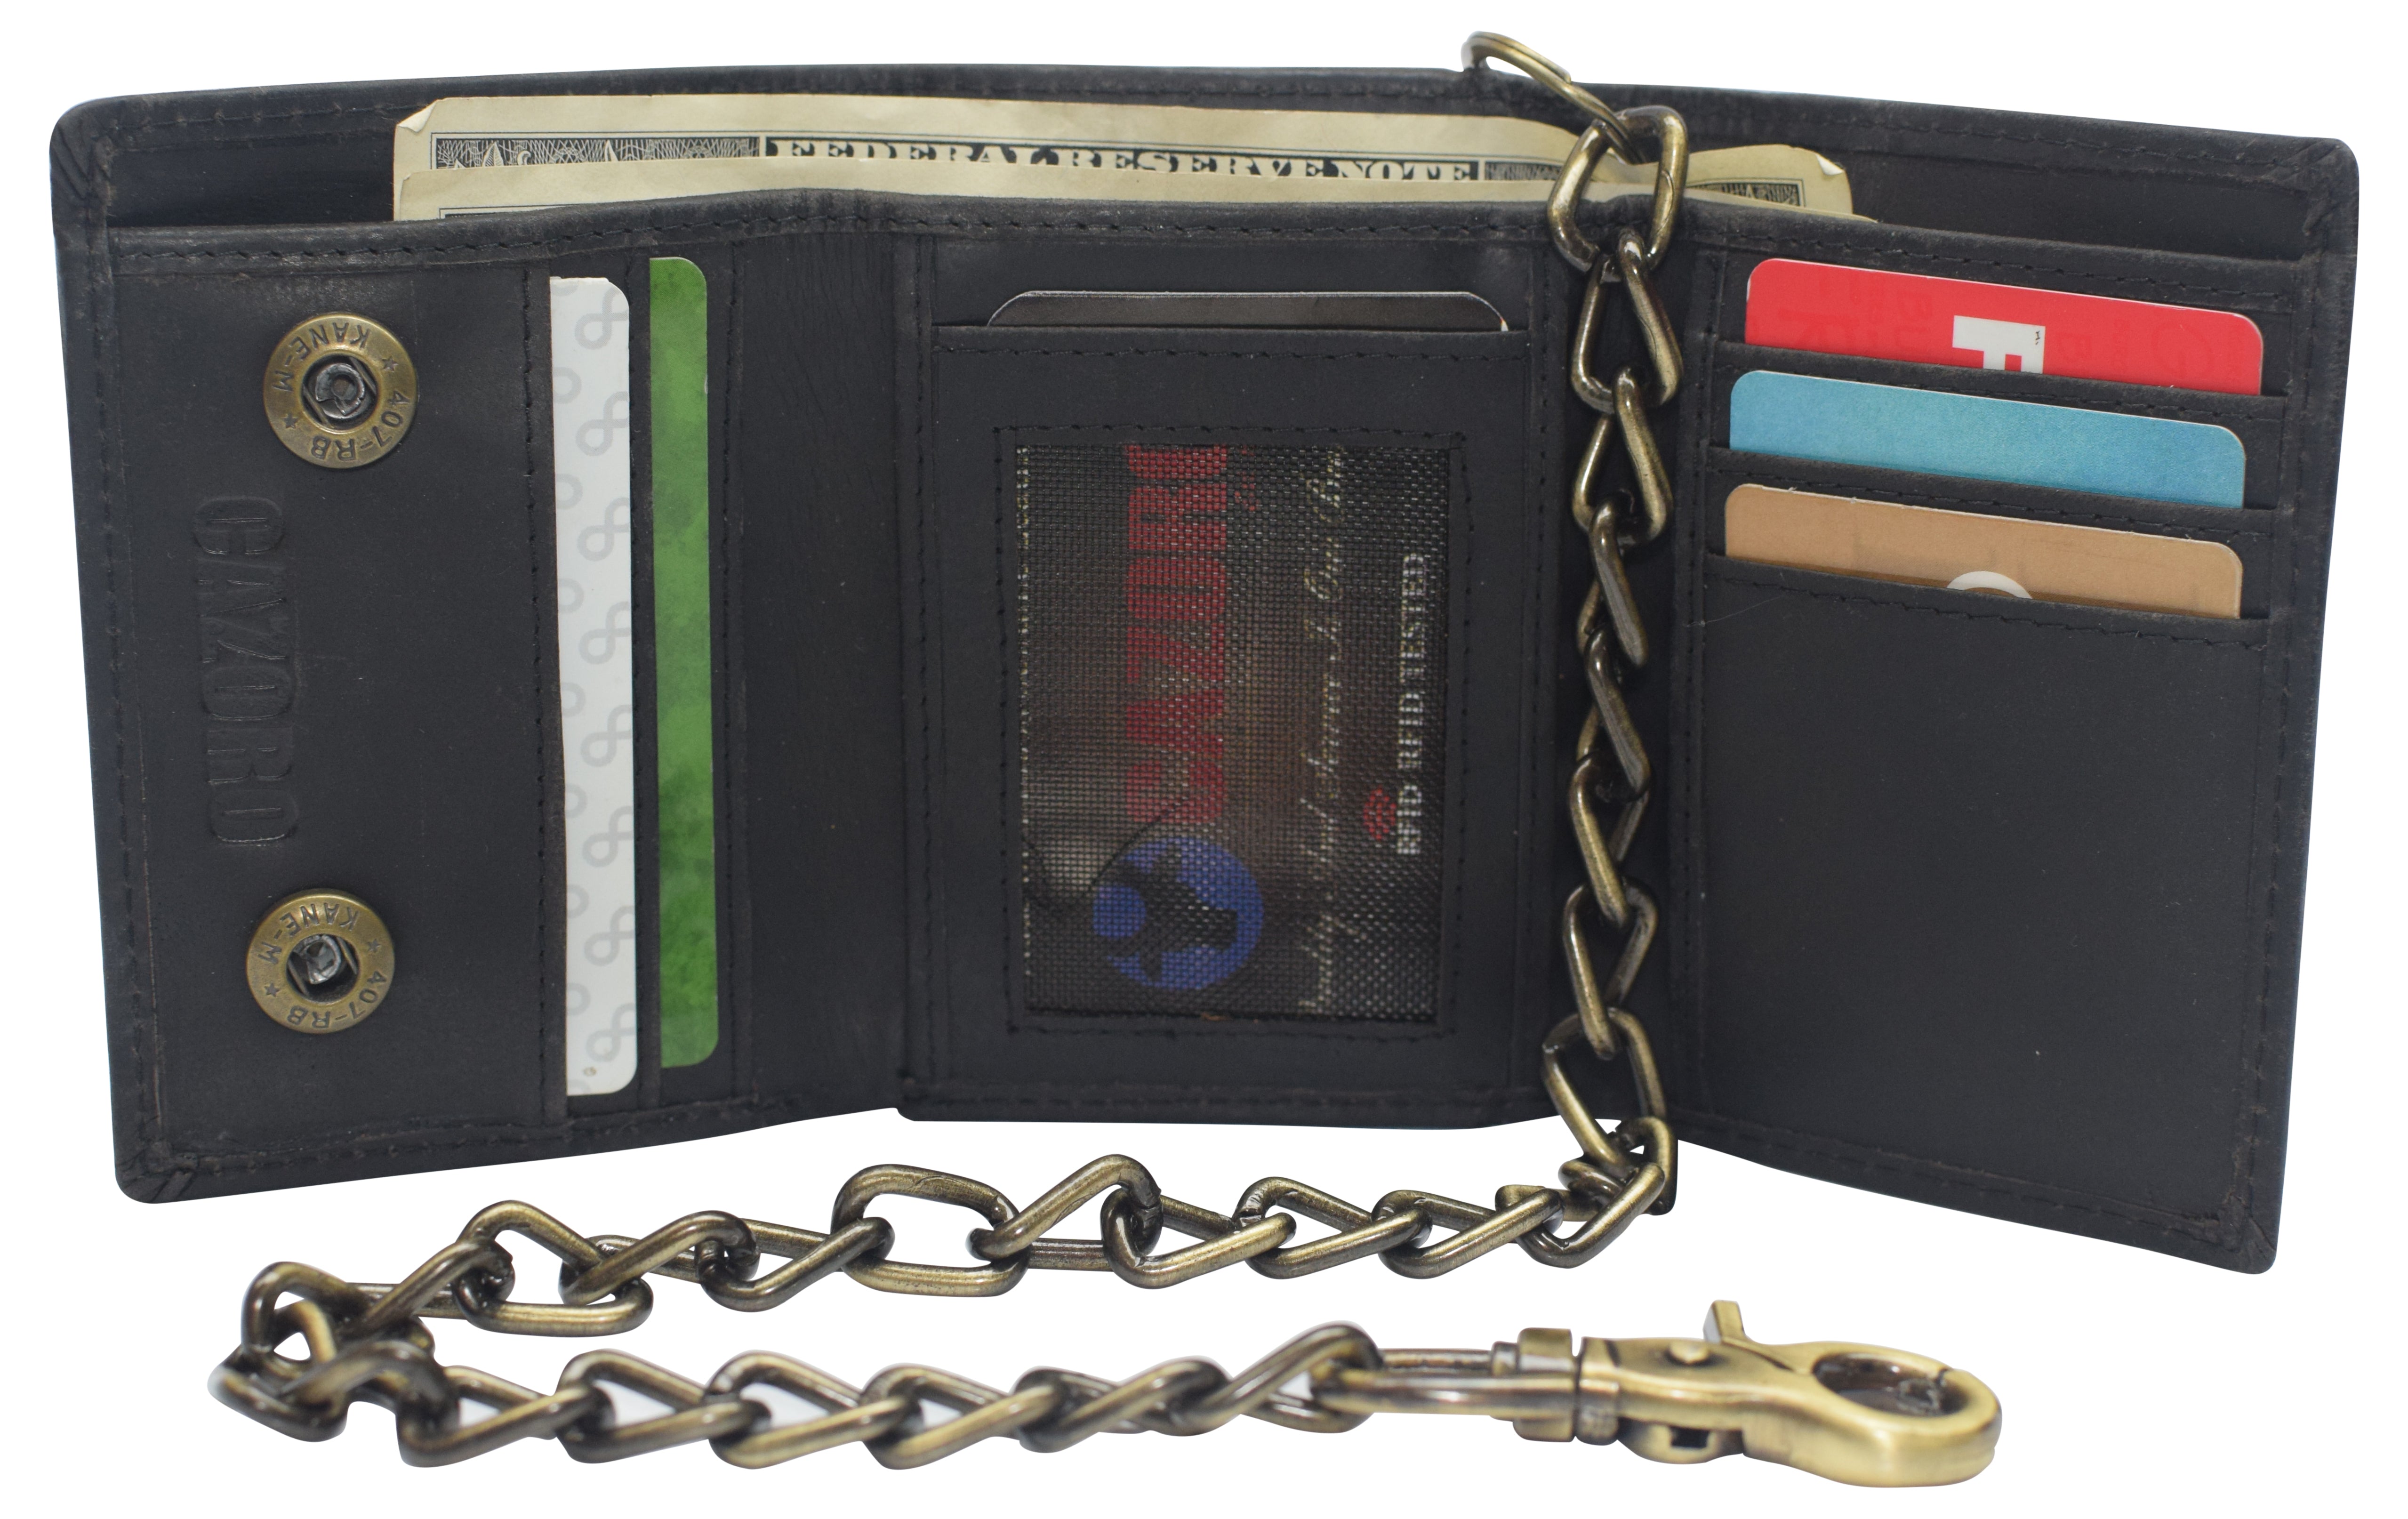 Chain Wallet for Men Trifold RFID safe Leather Snap Closed Stainless B